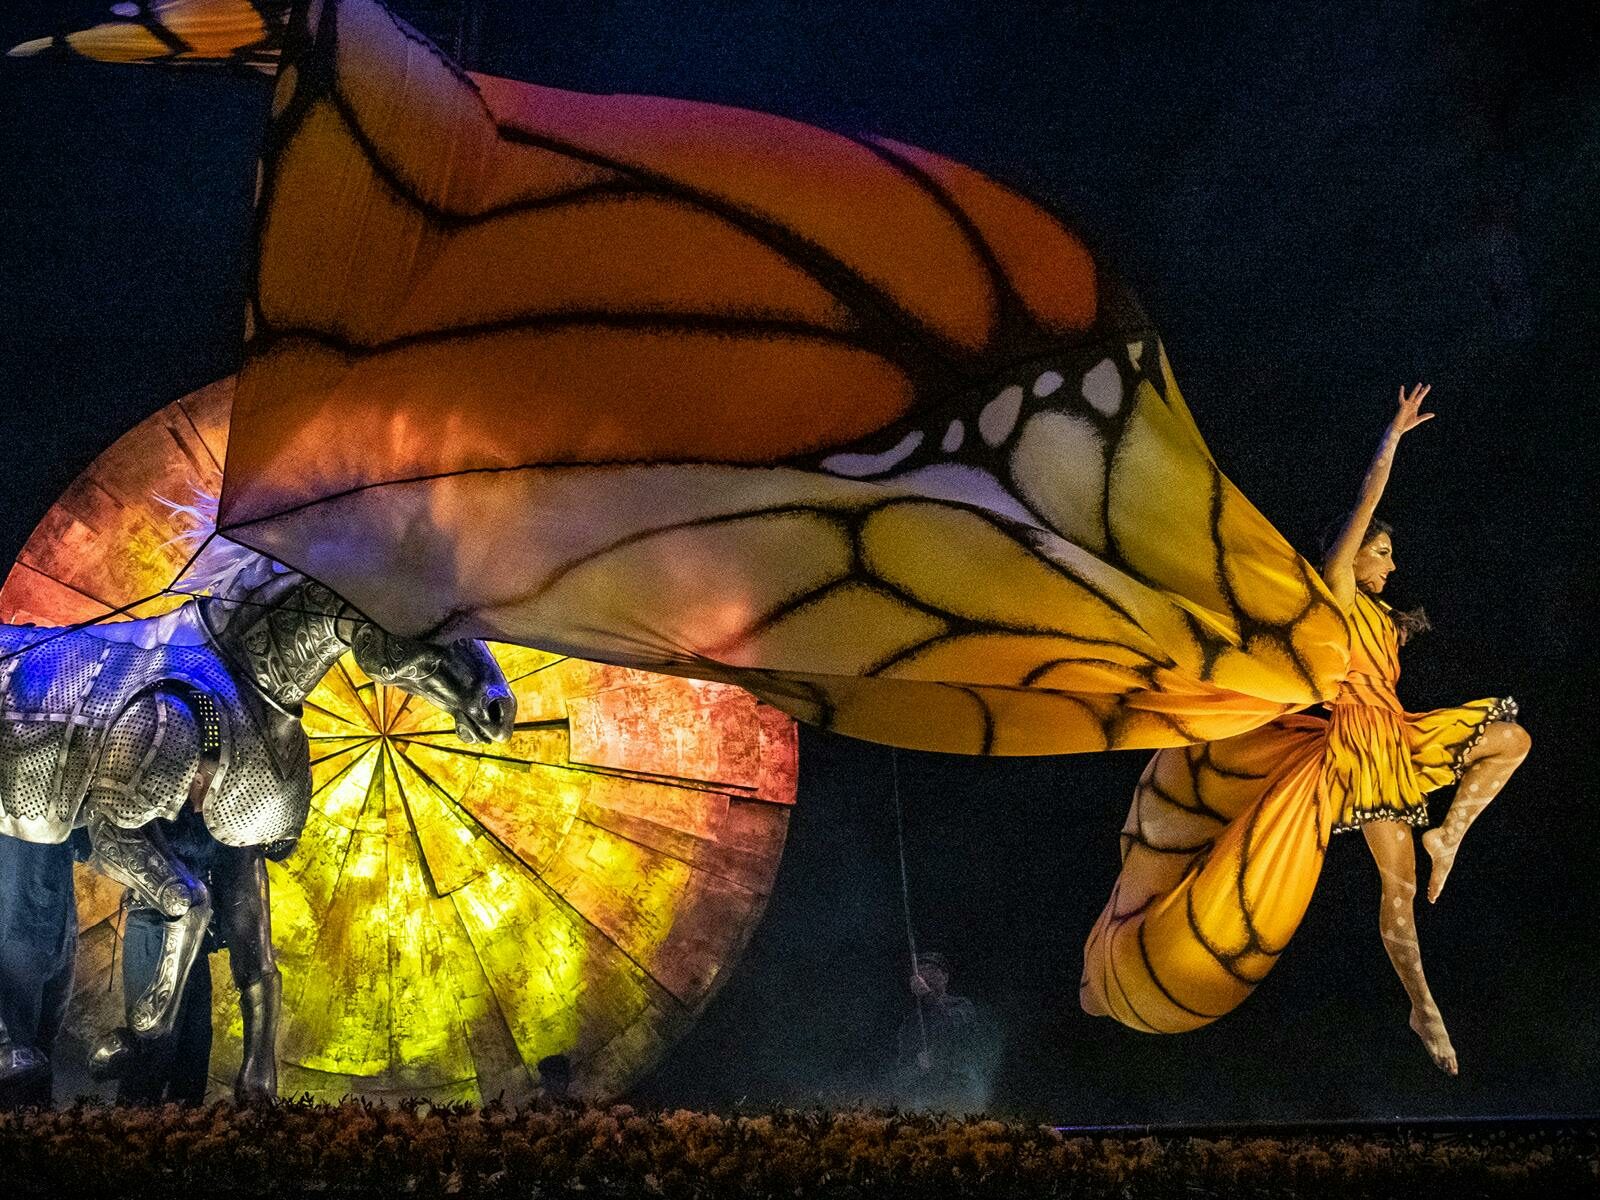 A performer leaps across the stage in a bright yellow and orange butterfly costume.